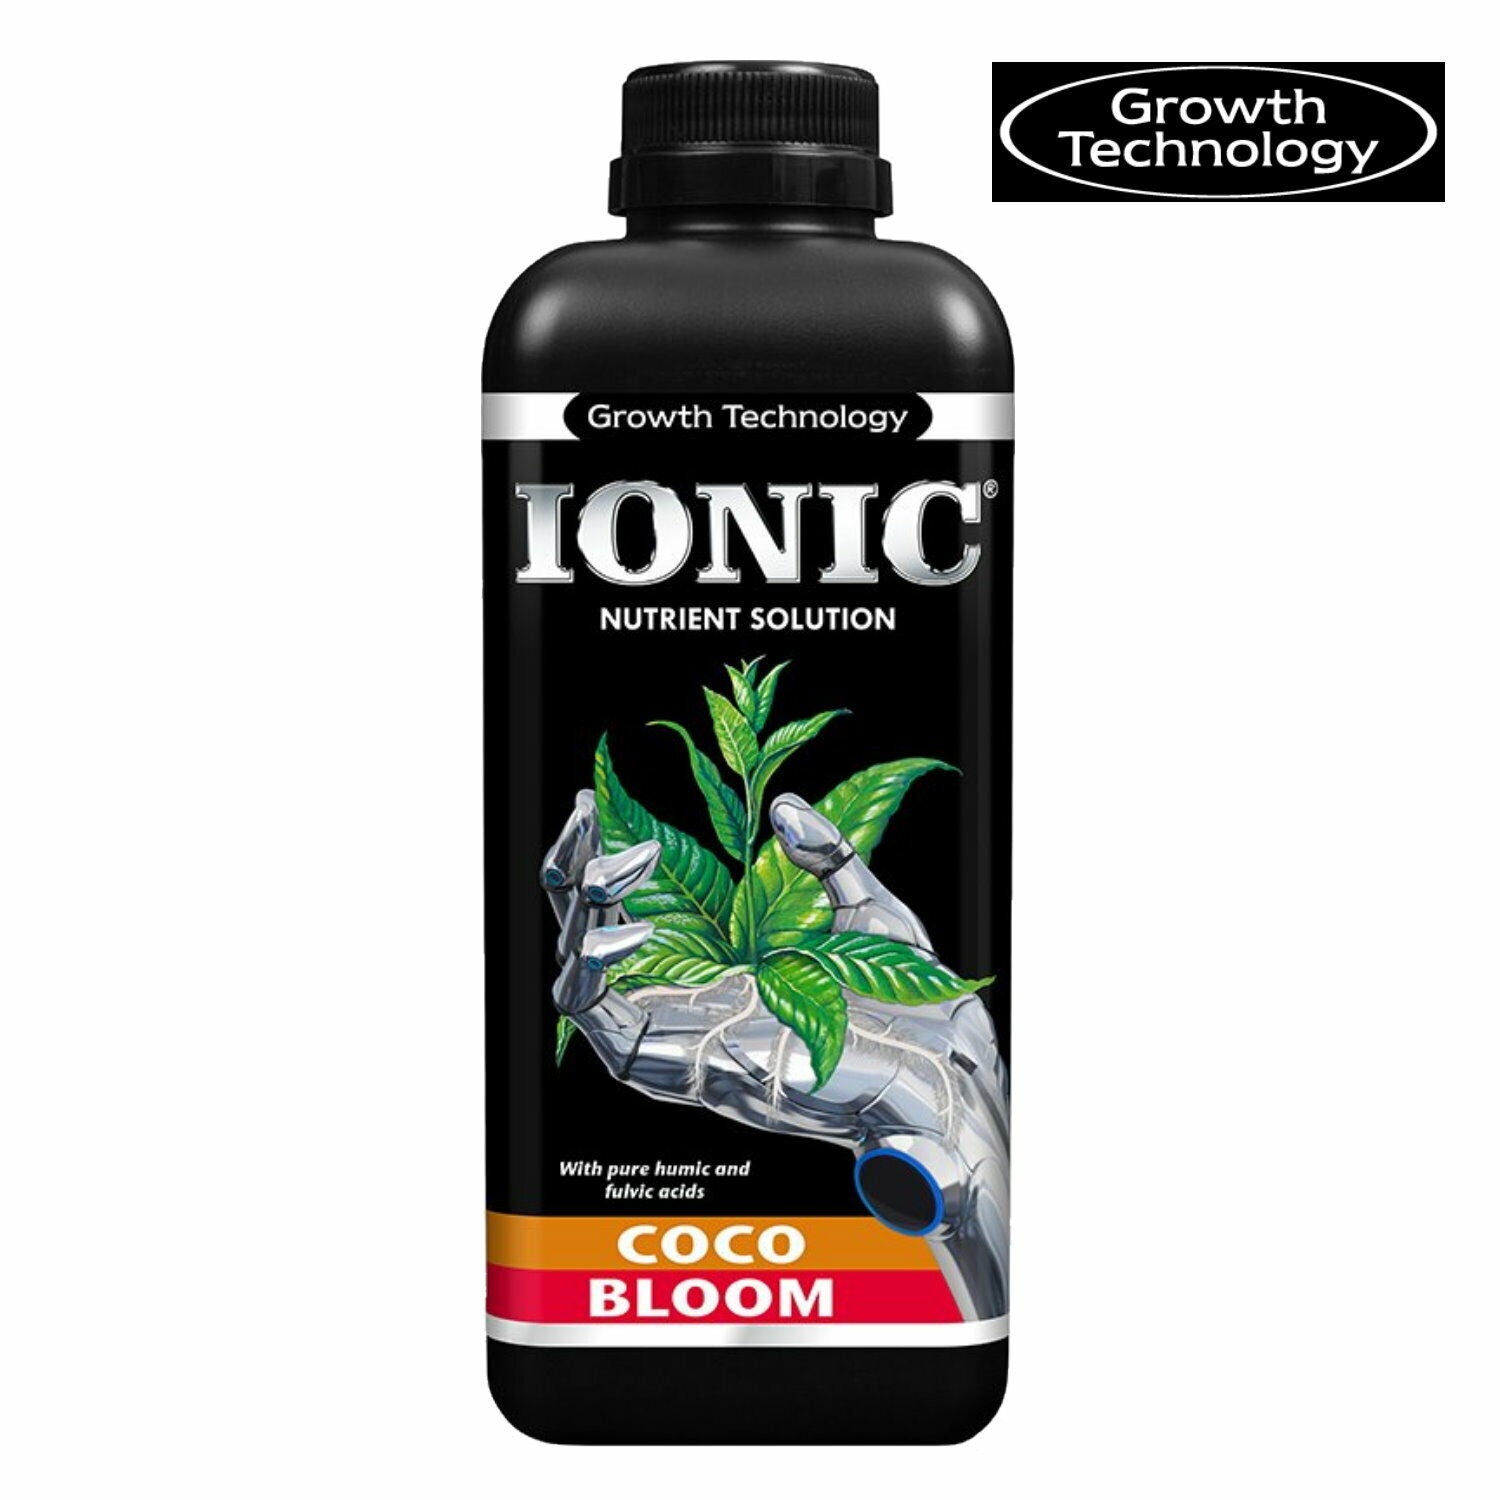 IONIC COCO BLOOM 1 Litre Plant Flowering Nutrient Growth Technology Hydroponics